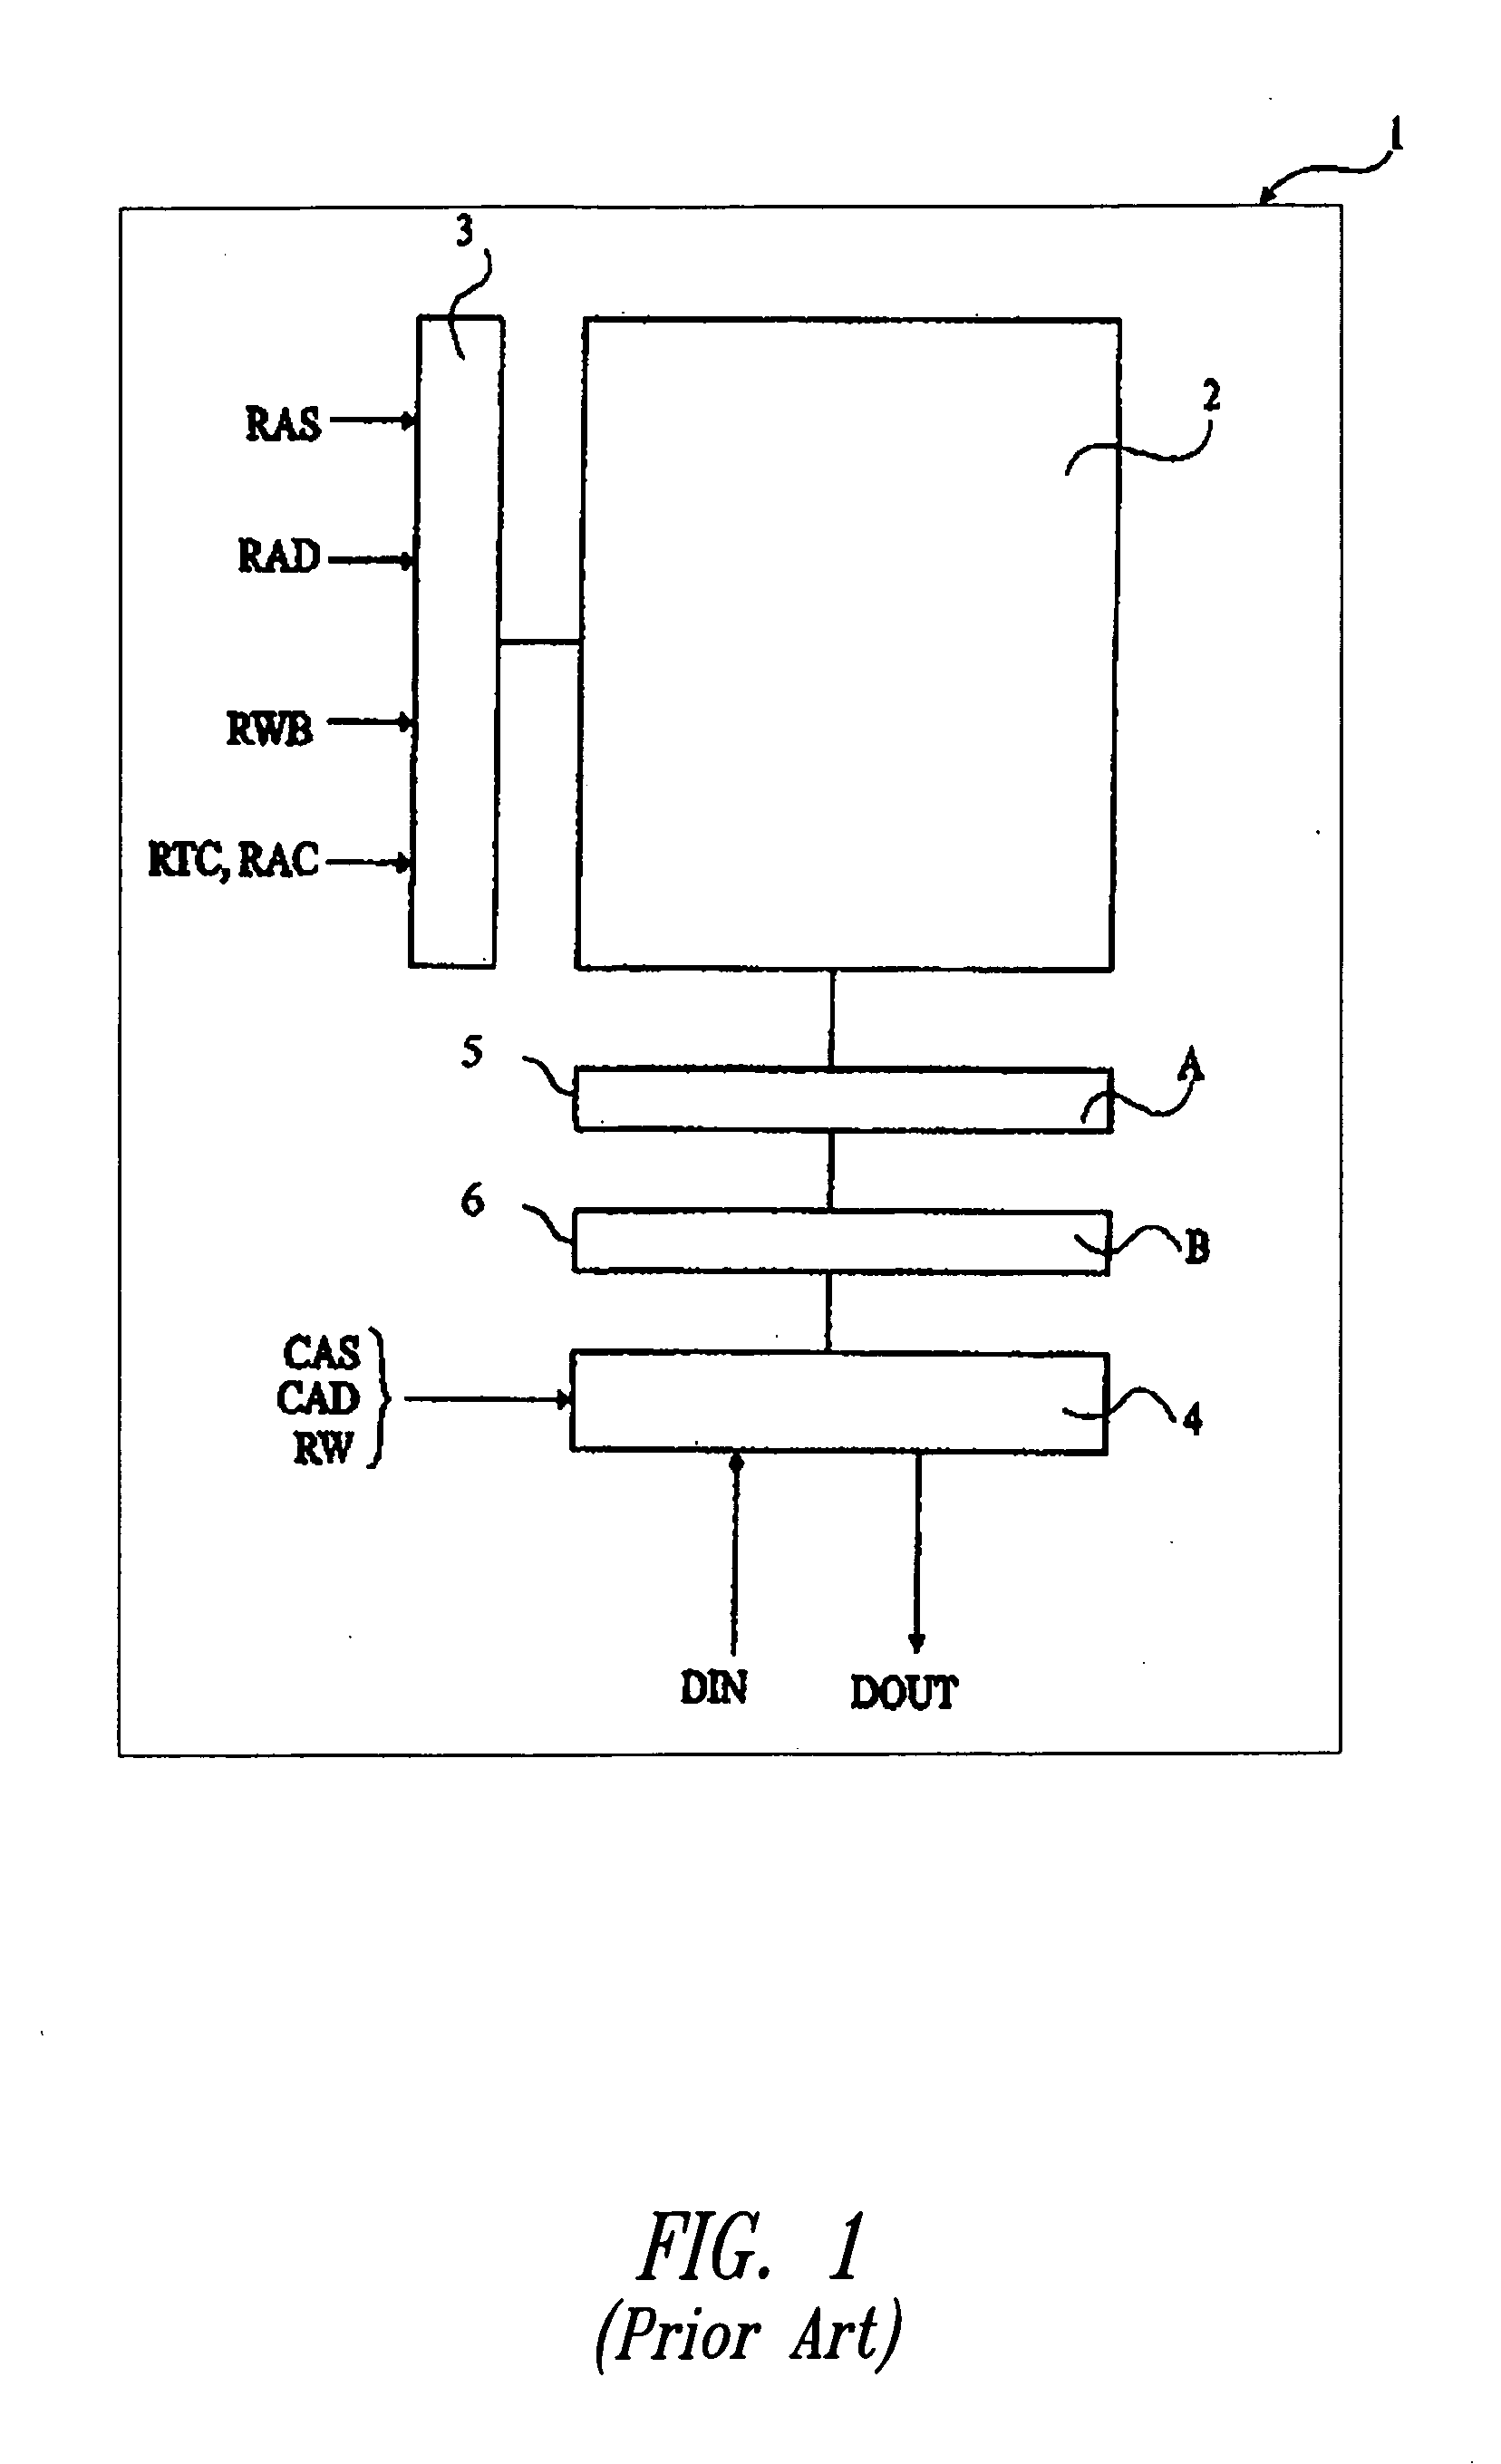 Dynamic random access memory having at least two buffer registers and method for controlling such a memory